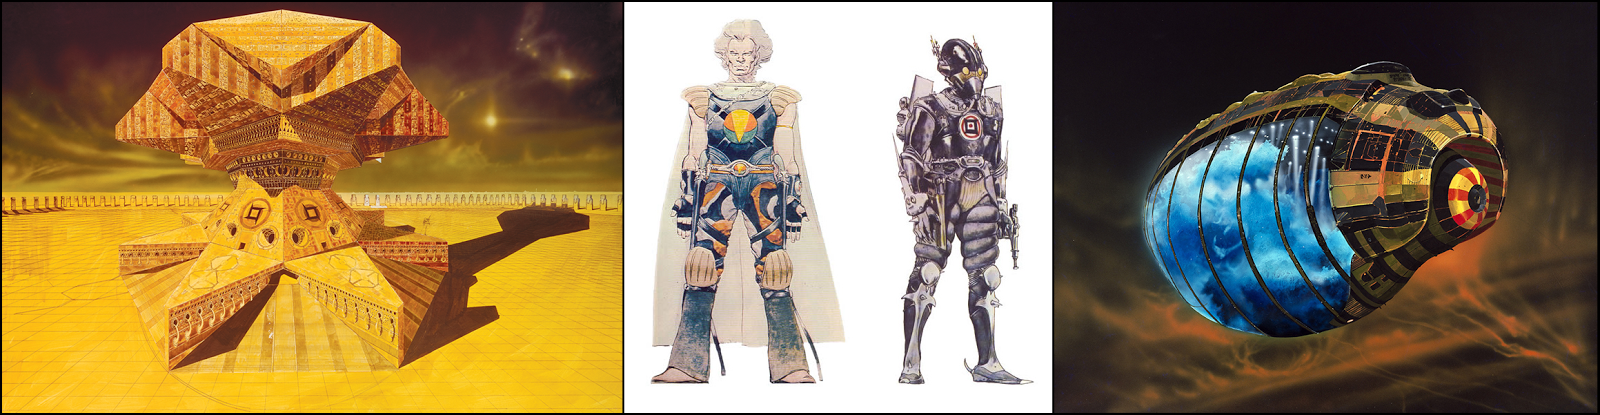 Download free concept art wallpapers by Moebius, Chris Foss, and H.R. Giger